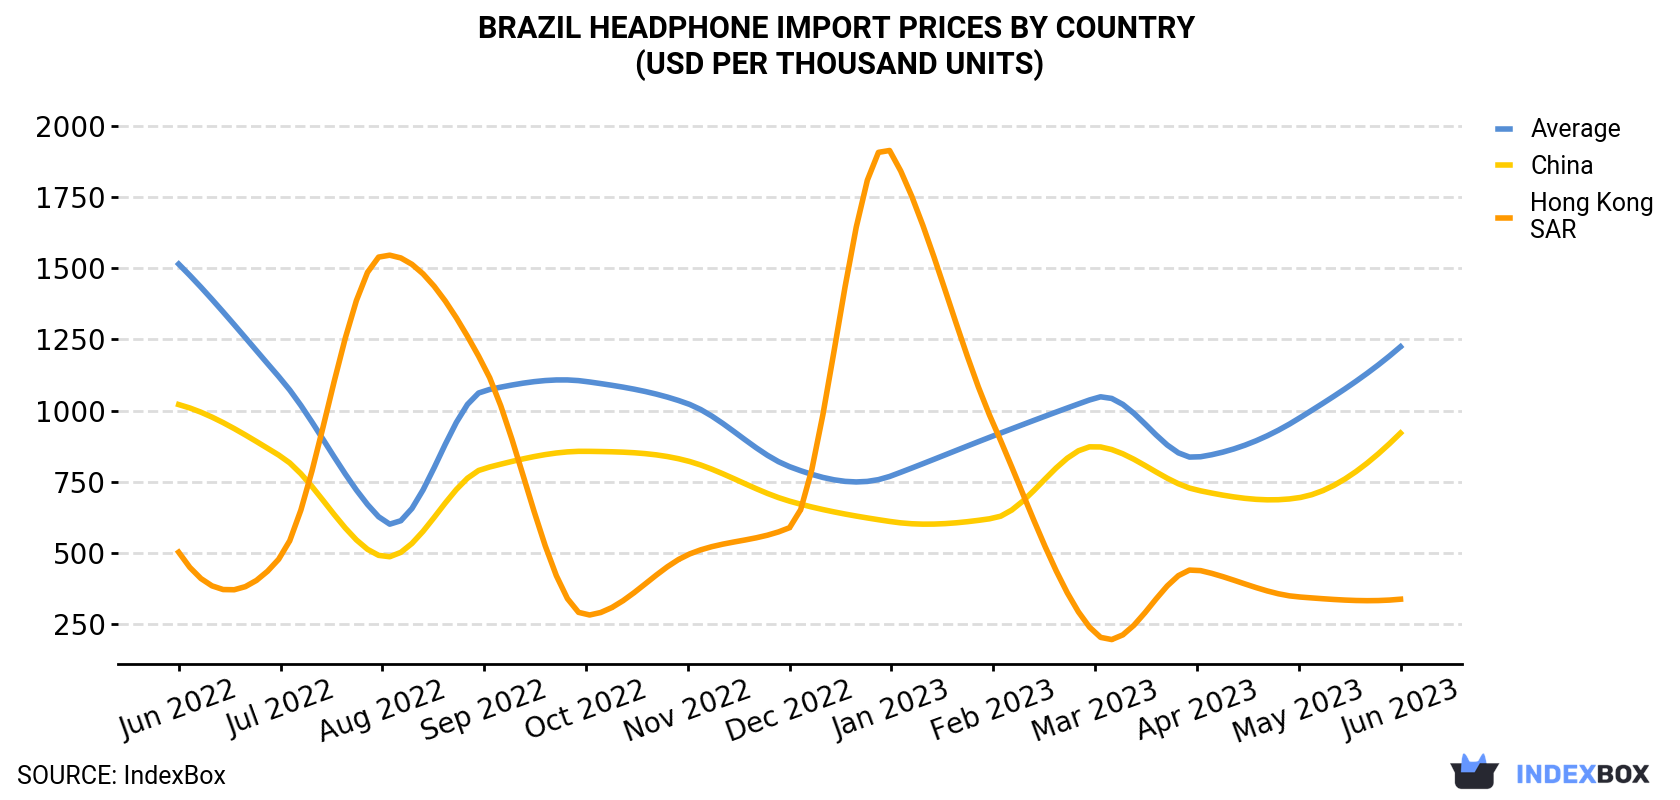 Brazil Headphone Import Prices By Country (USD Per Thousand Units)